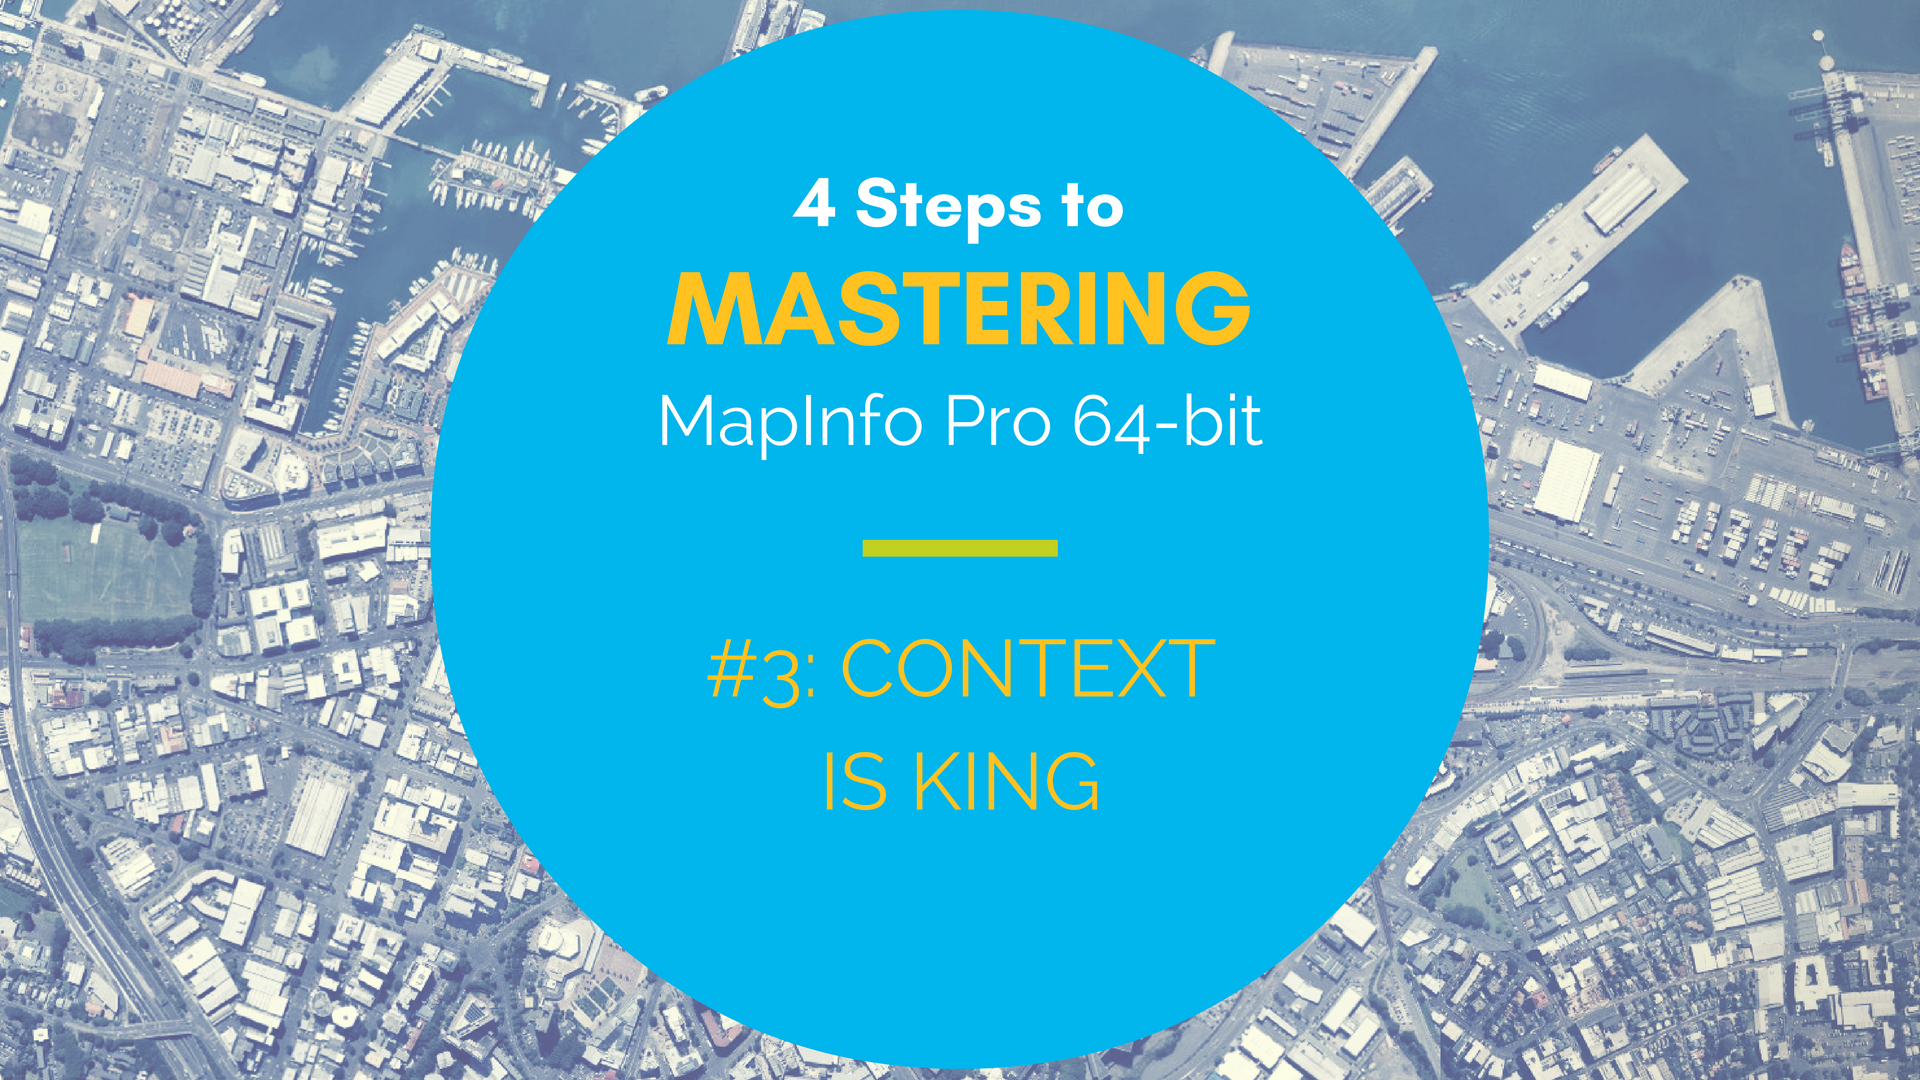 Mastering MapInfo Pro 64-bit - #3 Context is King